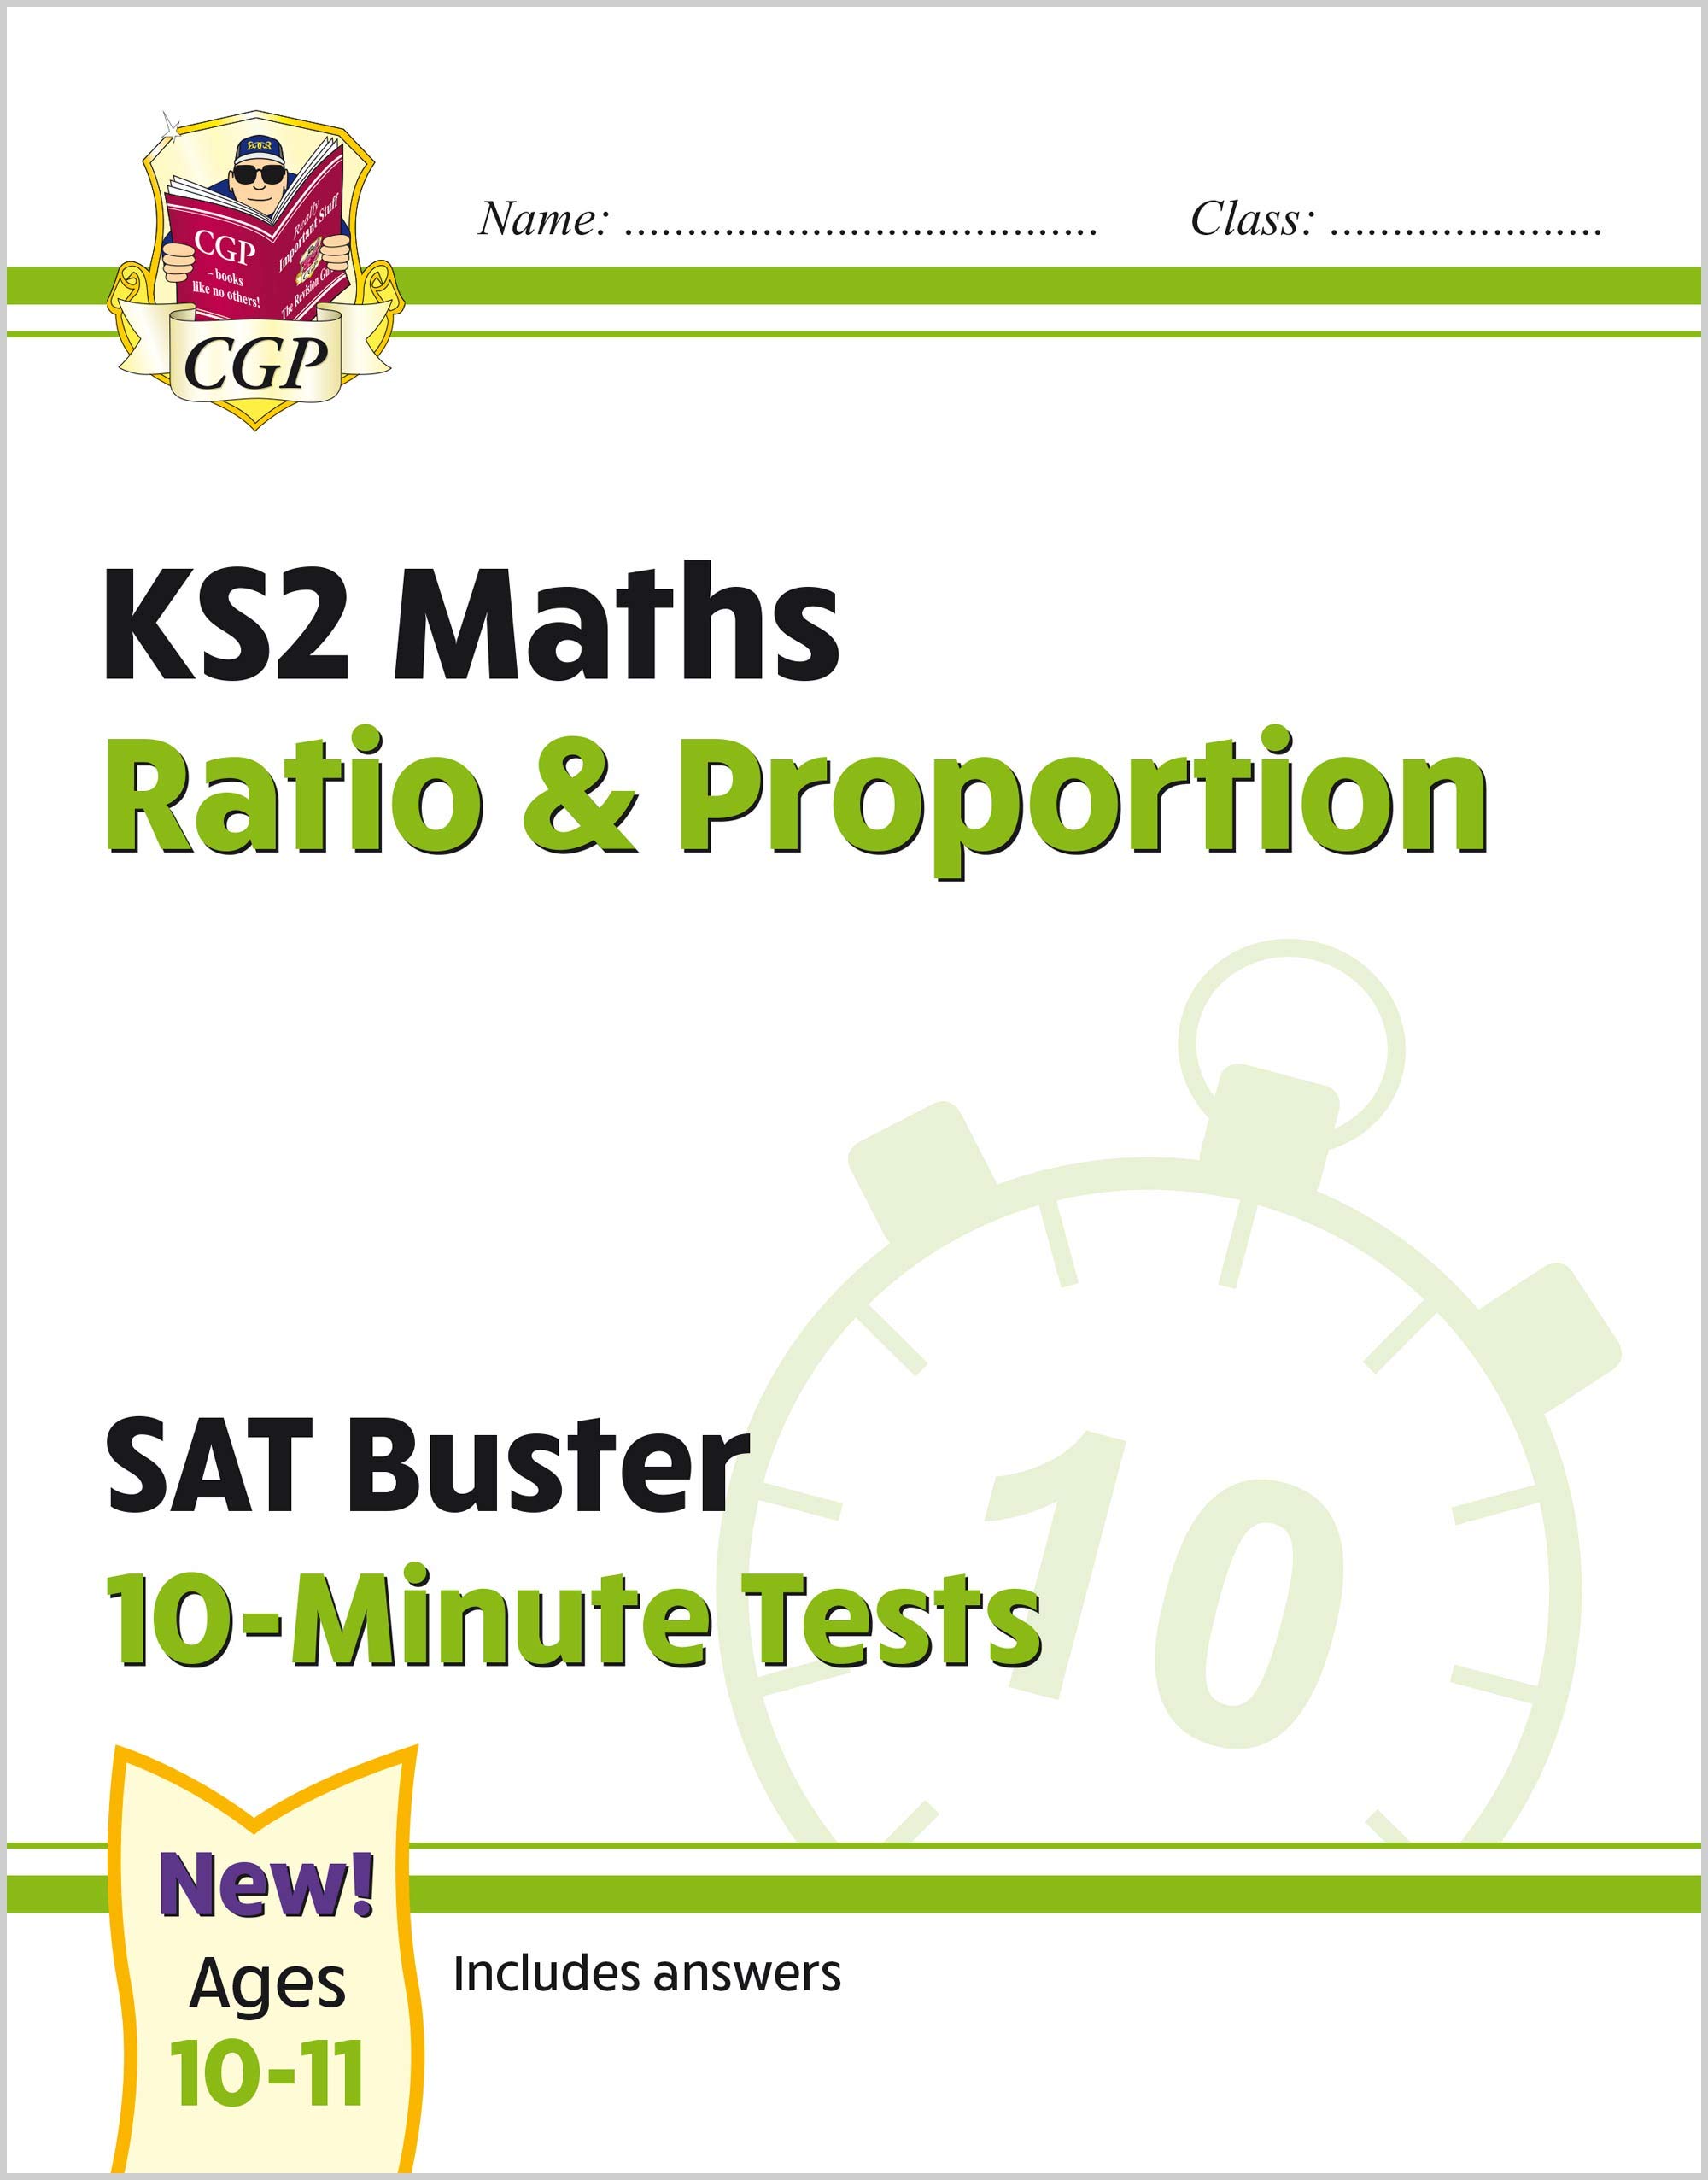 KS2 Maths SAT Buster 10-Minute Tests - Ratio and Proportion